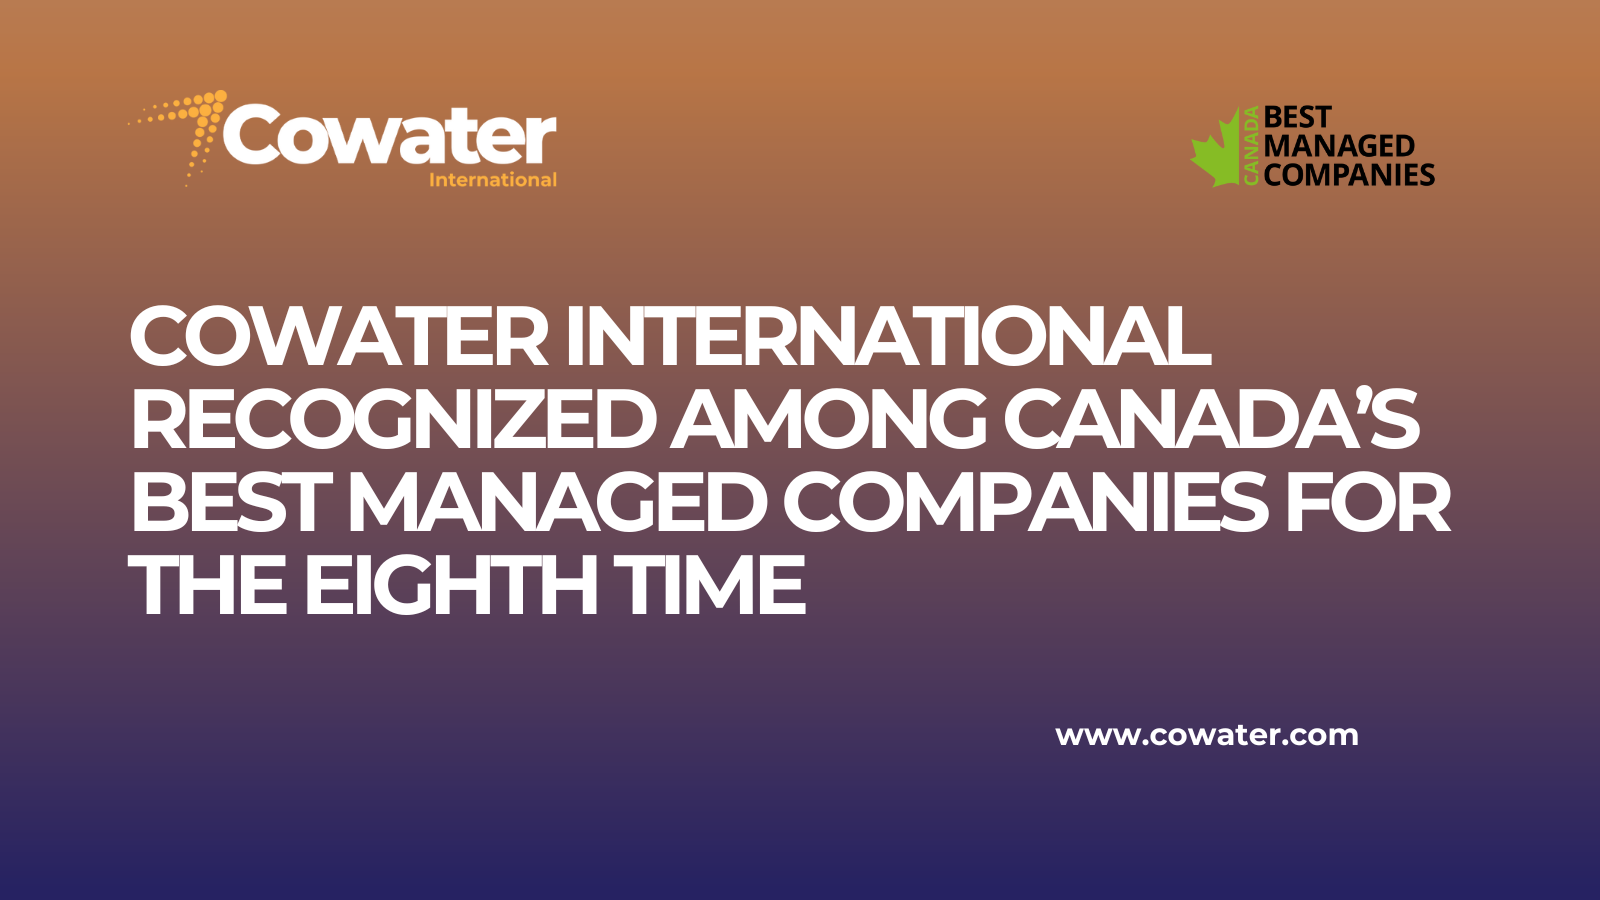 Cowater International recognized among Canada’s Best Managed Companies for the eighth time